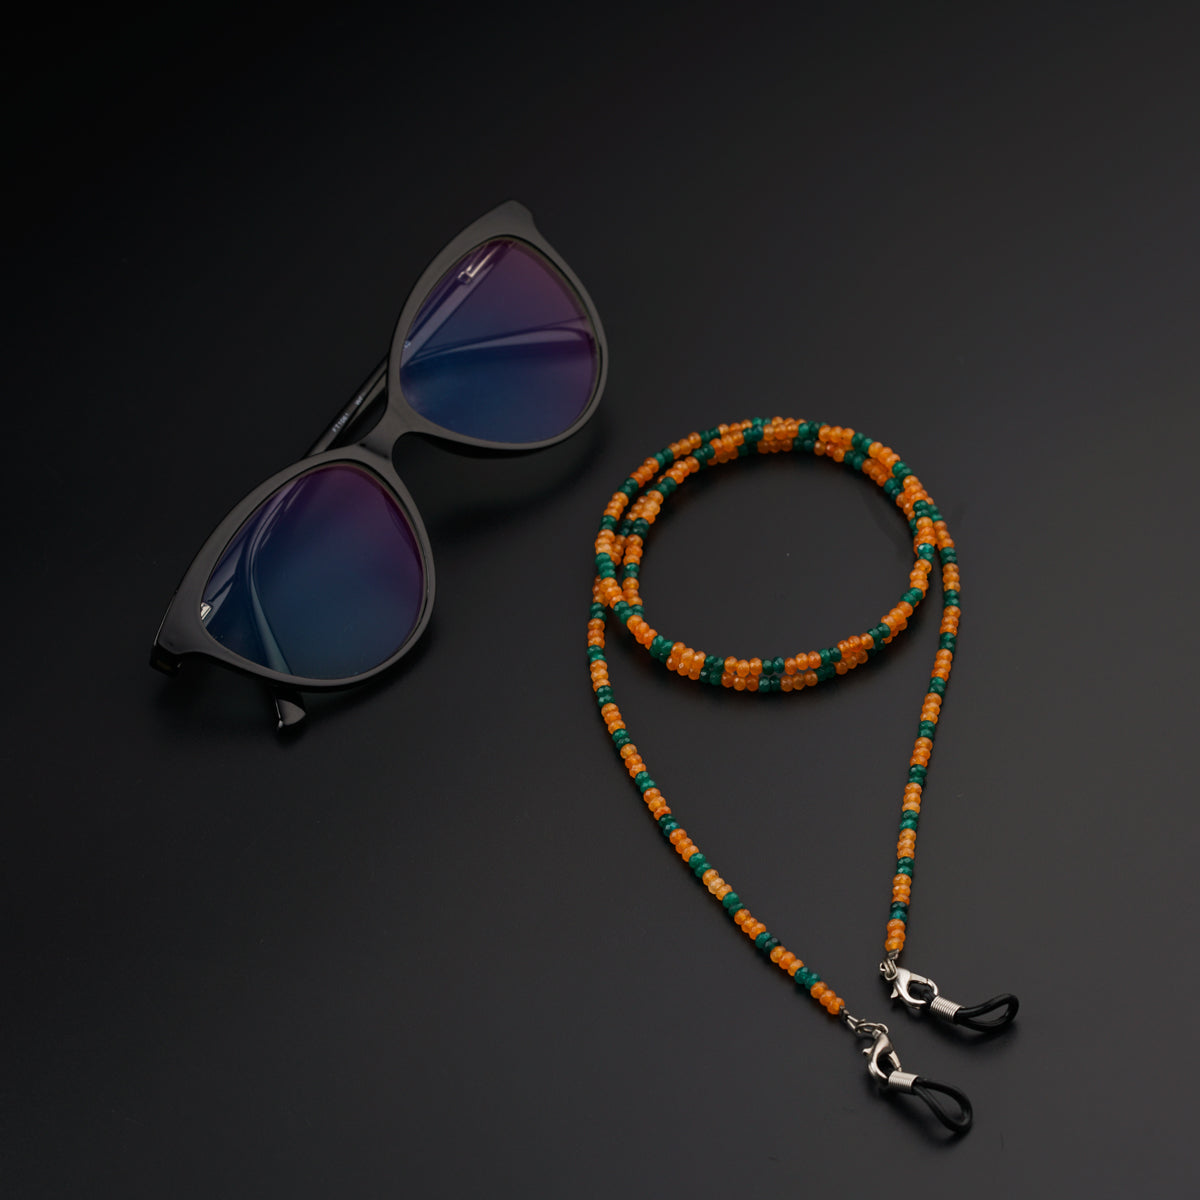 a pair of sunglasses and a beaded lanyard